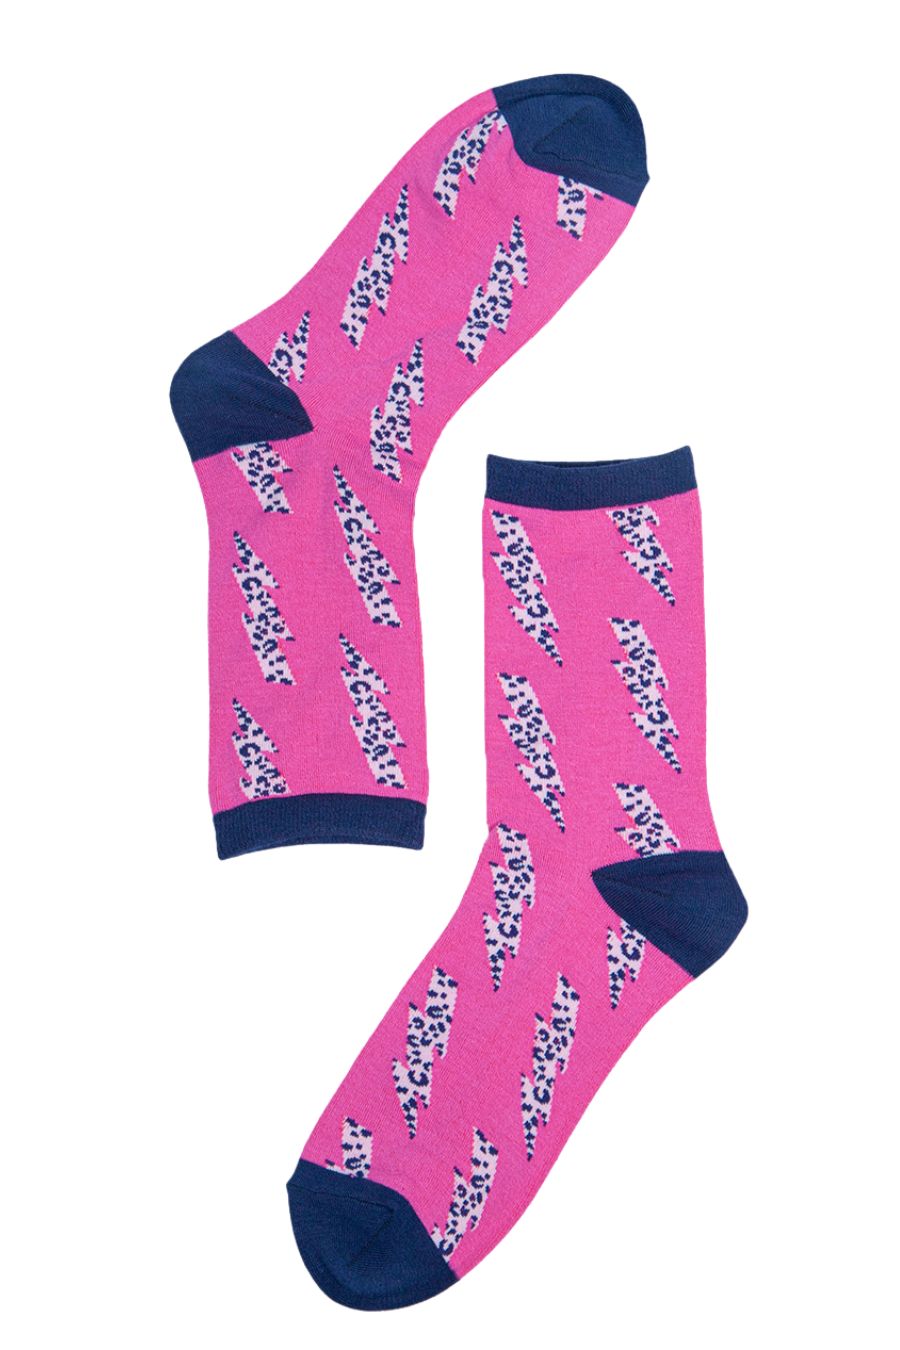 pink socks with navy blue leopard print thunder bolts